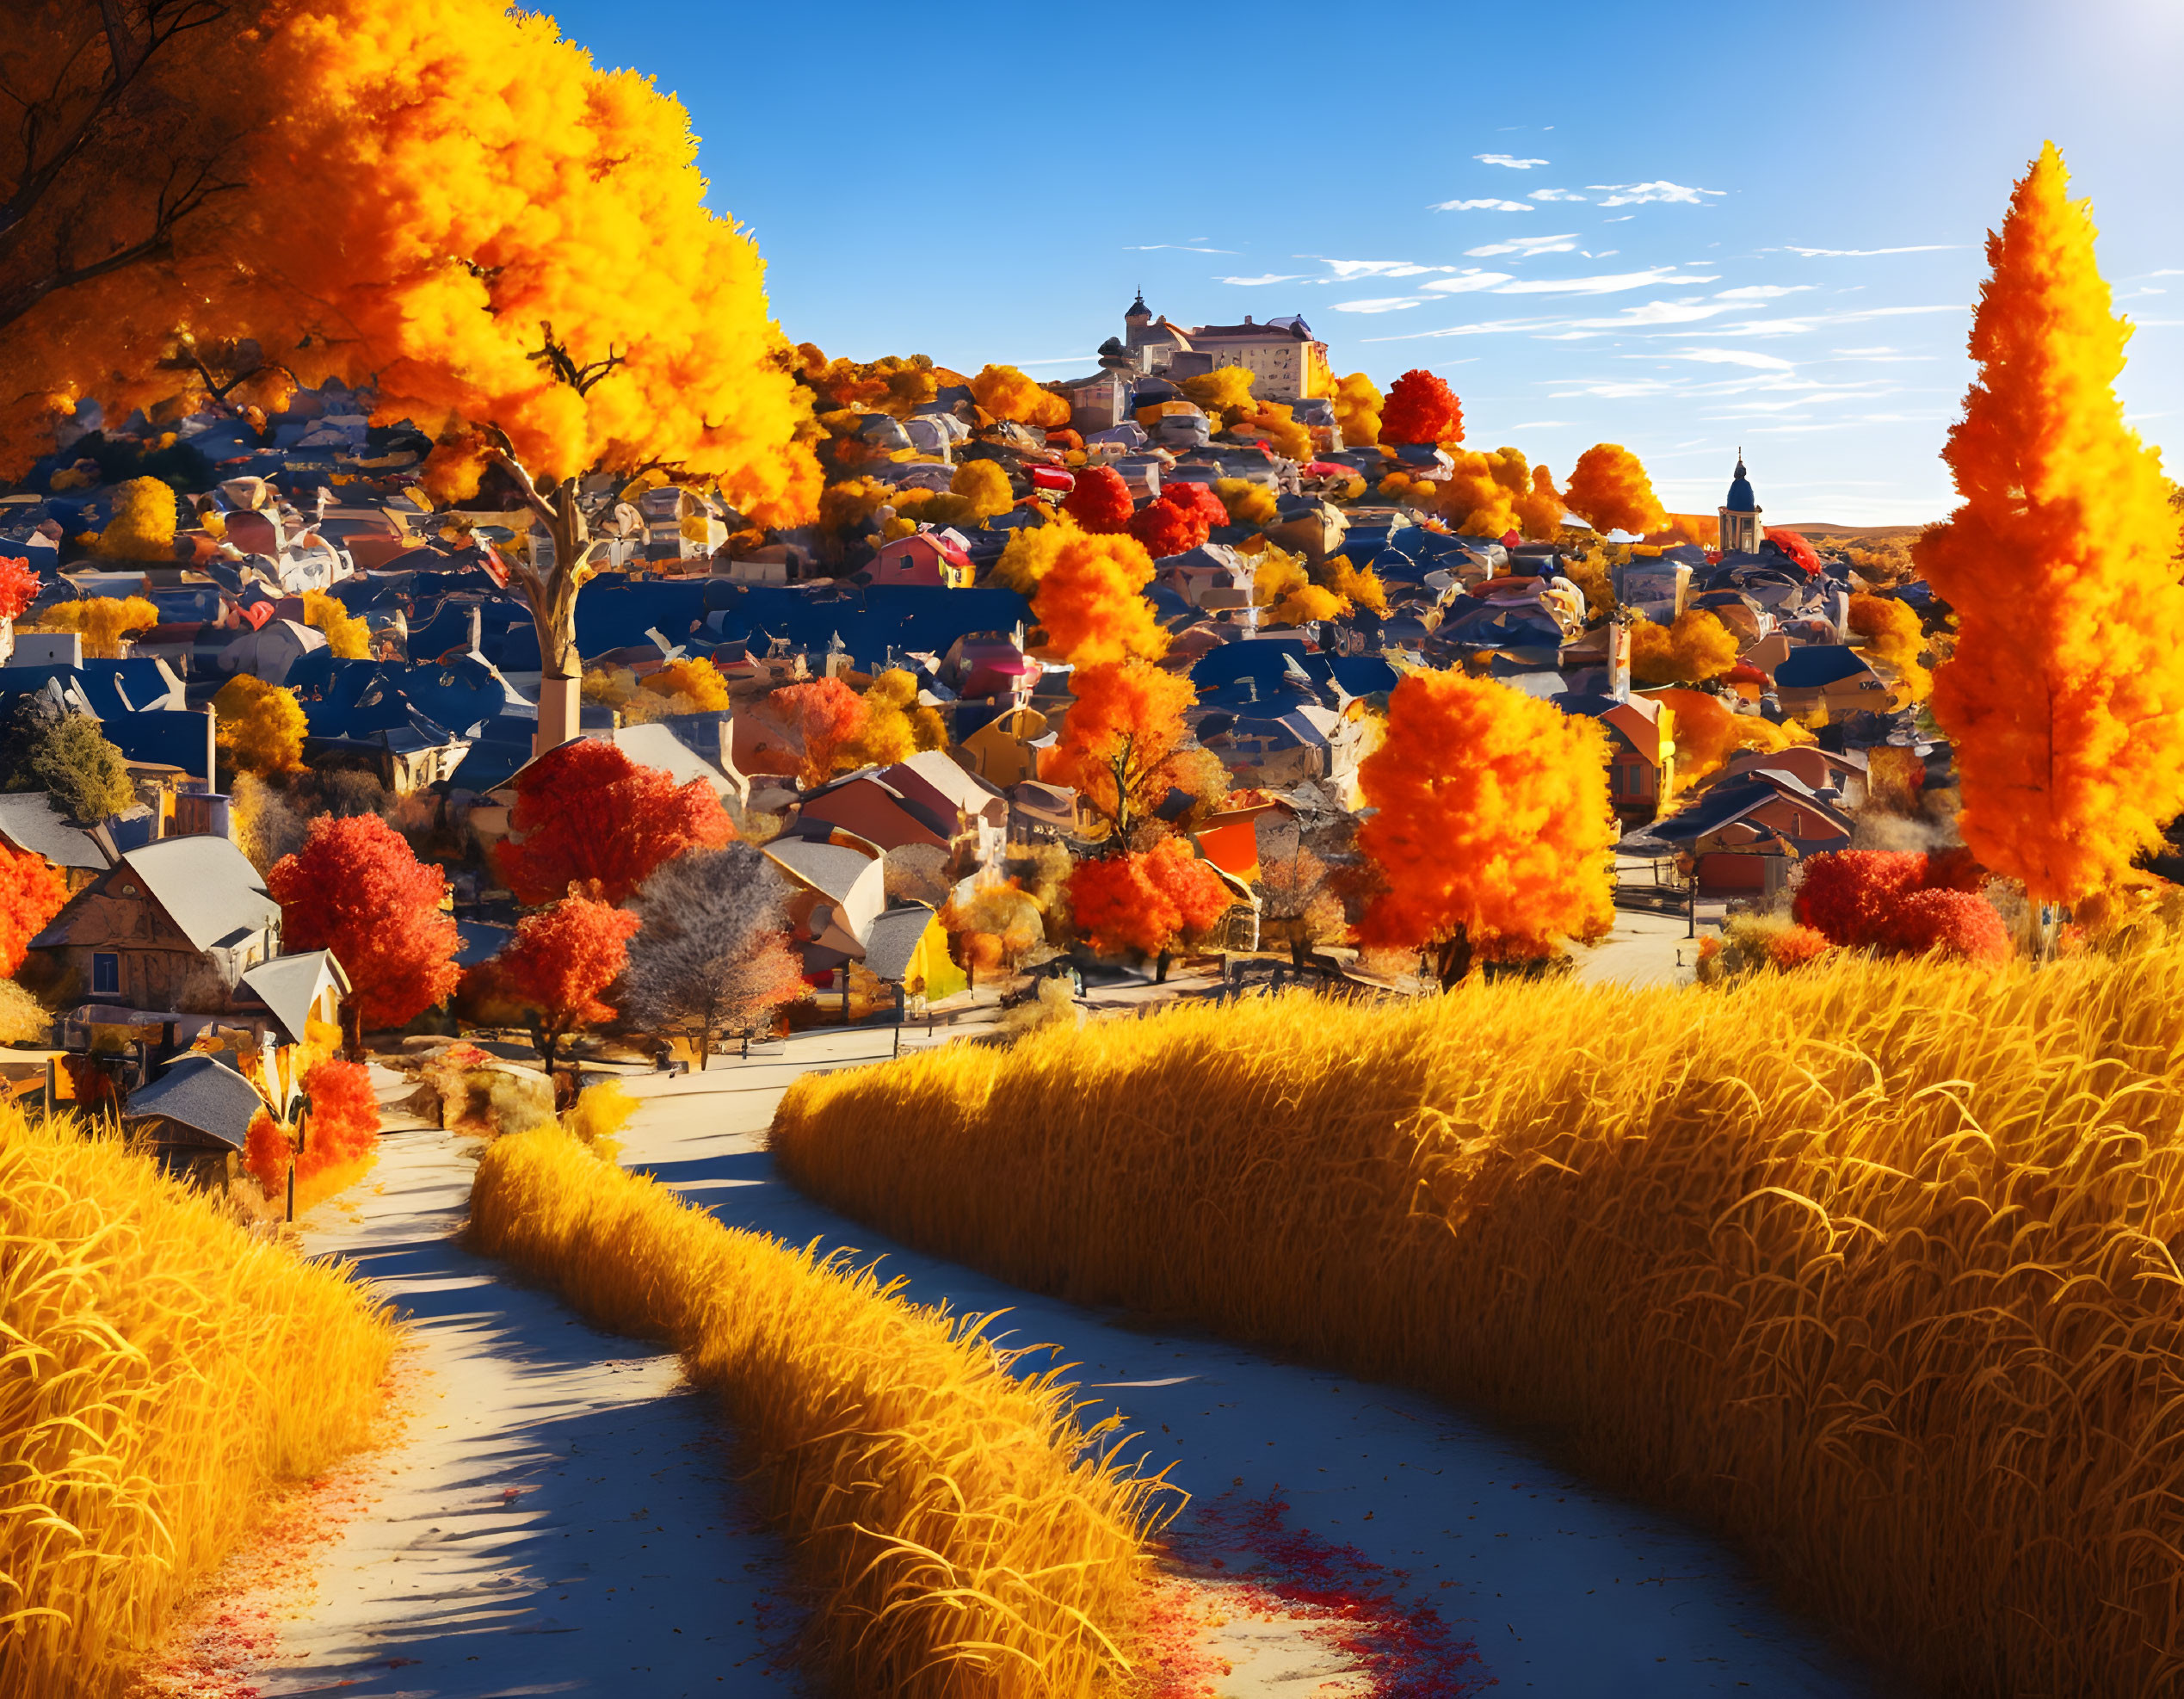 Scenic village with autumn foliage, wheat fields, and winding road